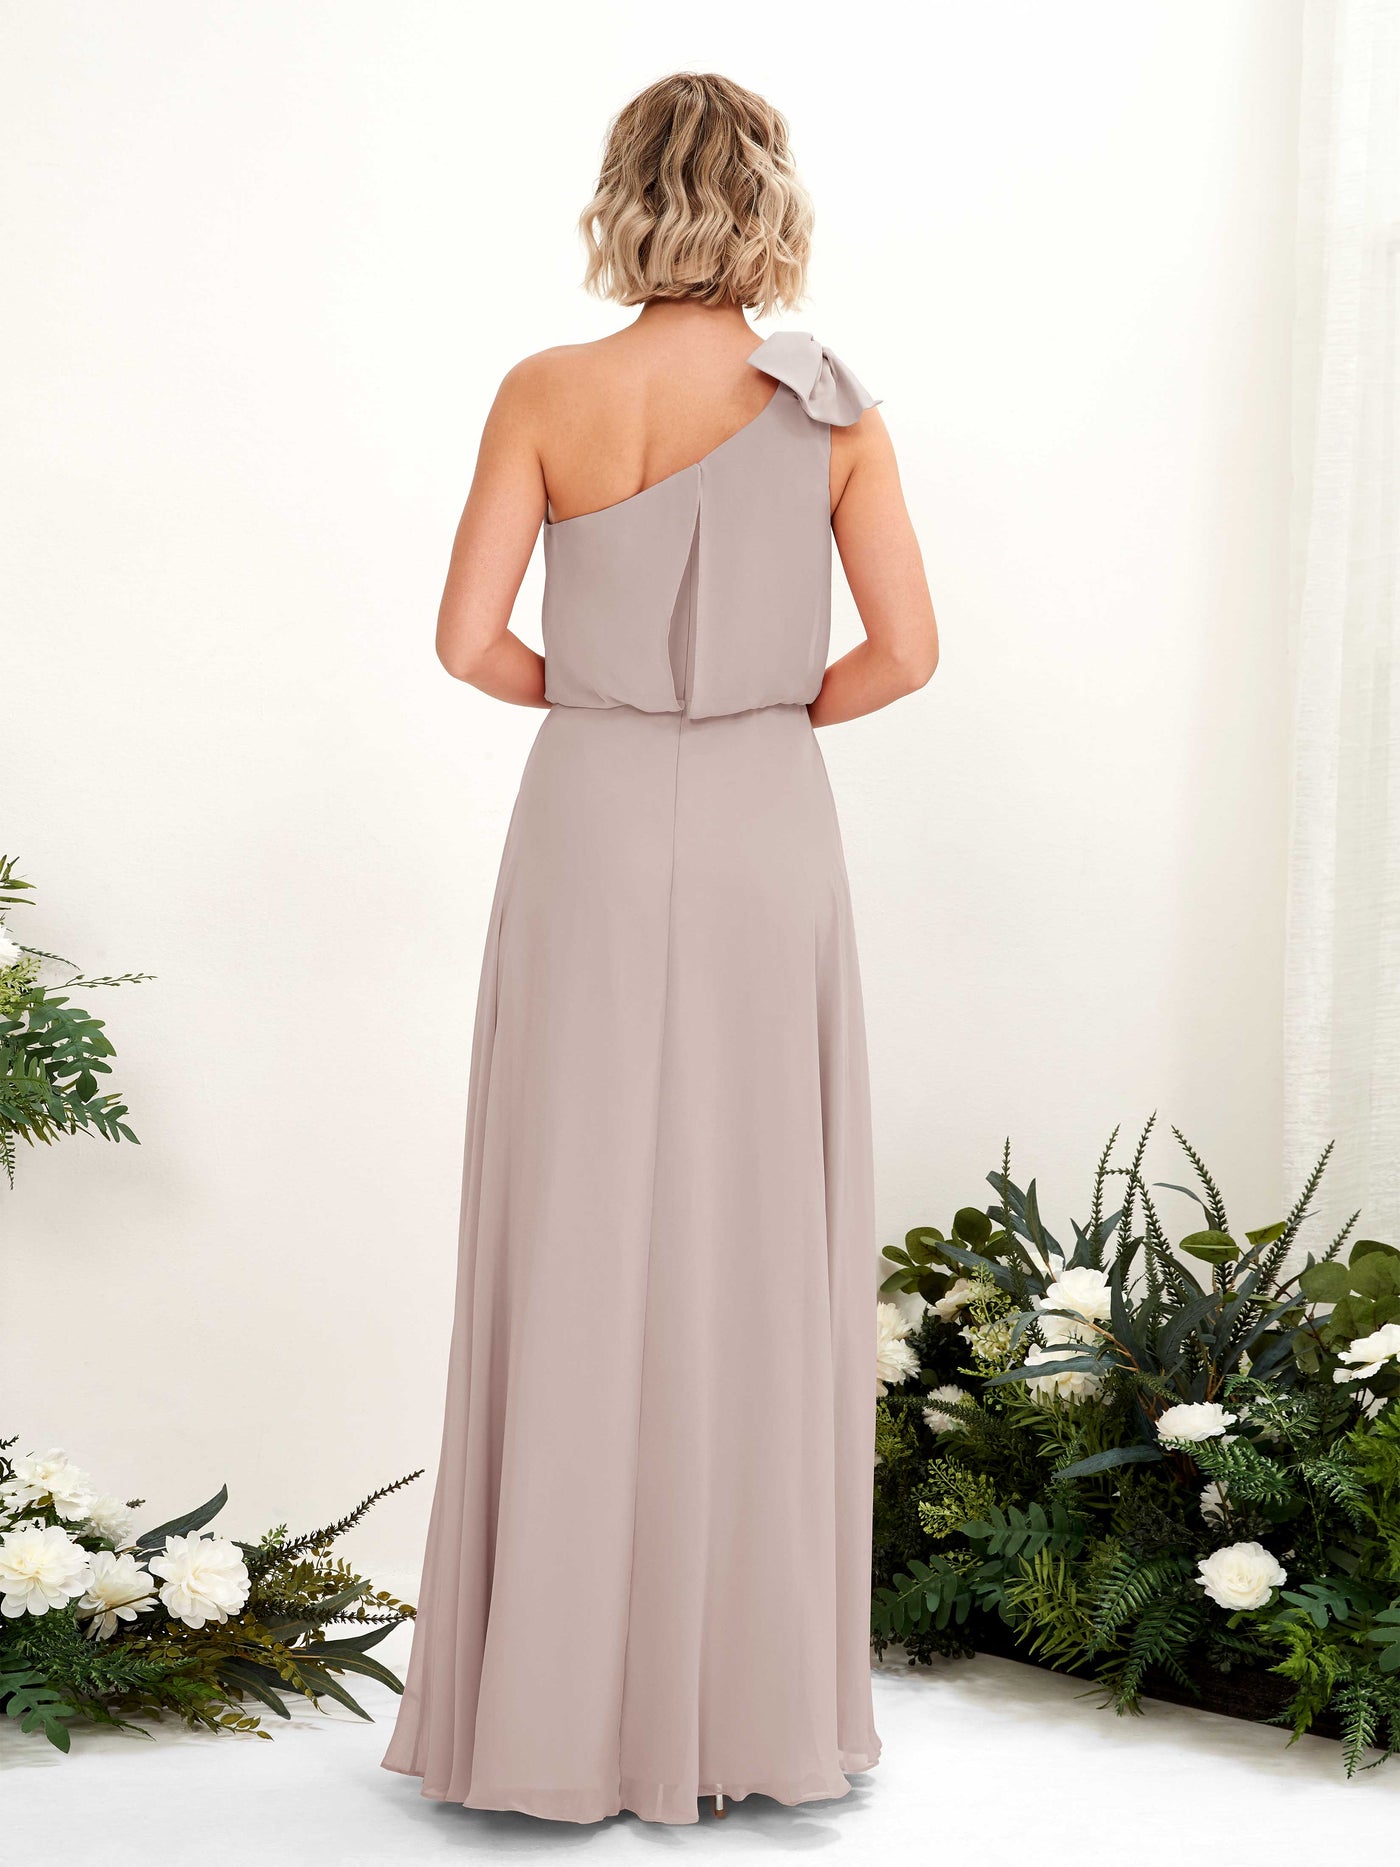 Taupe Bridesmaid Dresses Bridesmaid Dress A-line Chiffon One Shoulder Full Length Sleeveless Wedding Party Dress (81225524)#color_taupe